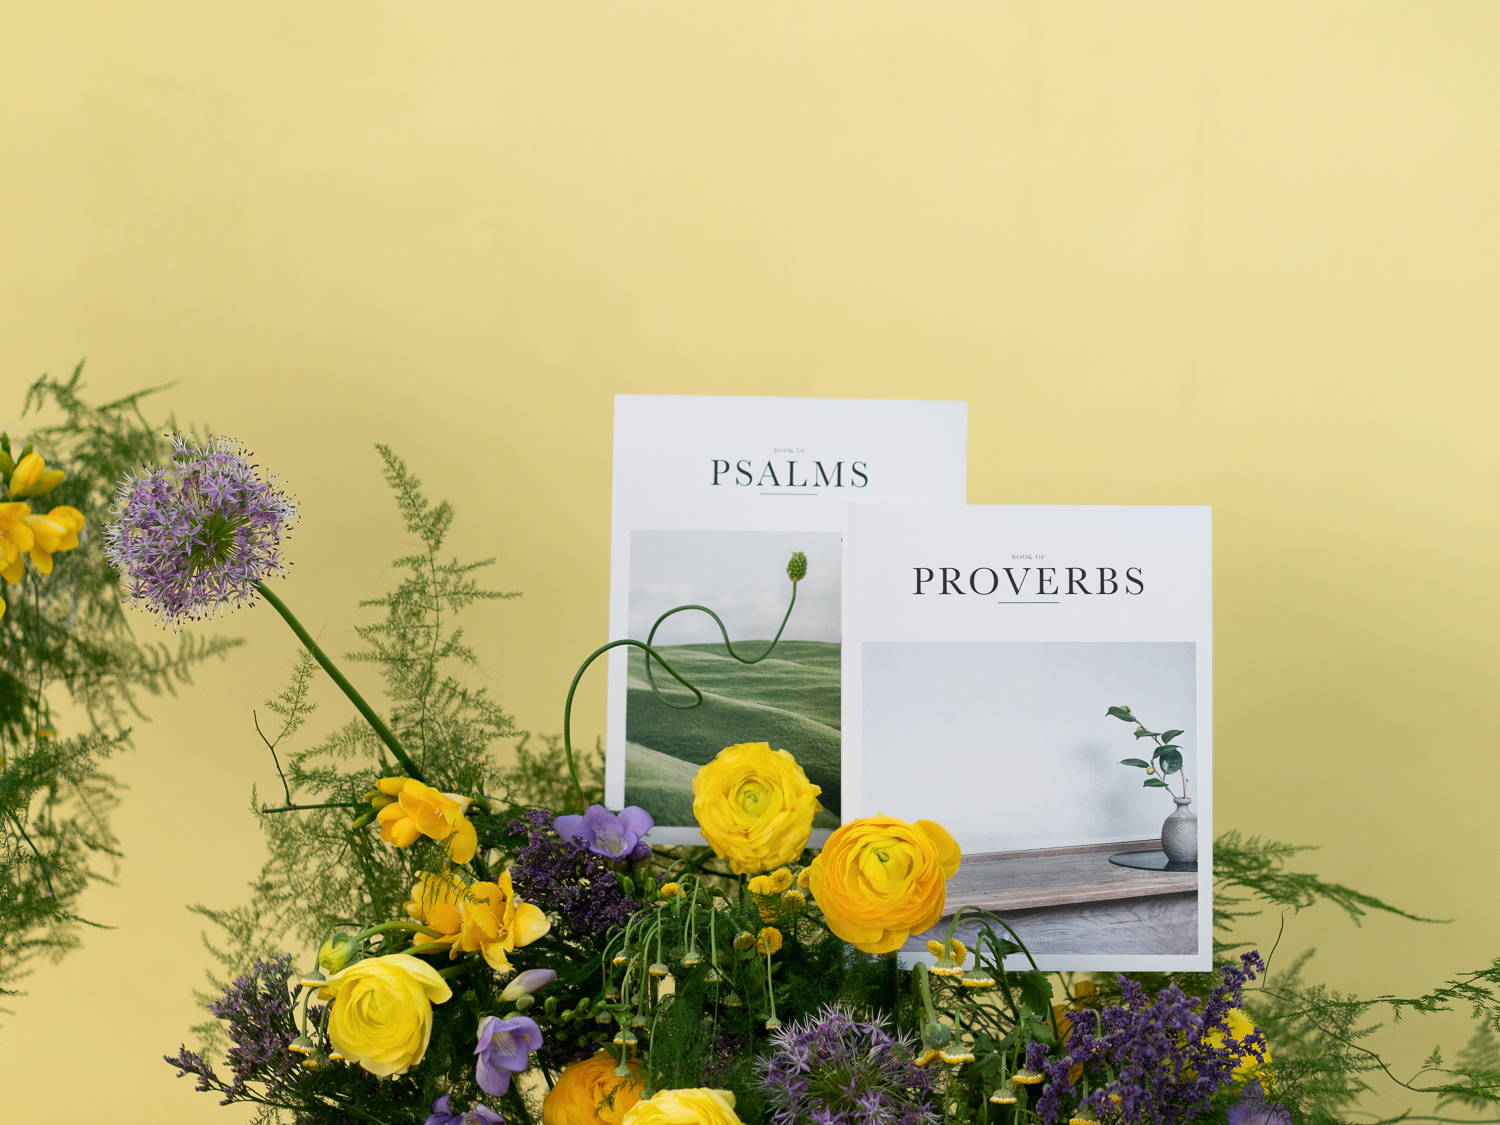 Alabaster Psalms and Proverbs on yellow background with flowers